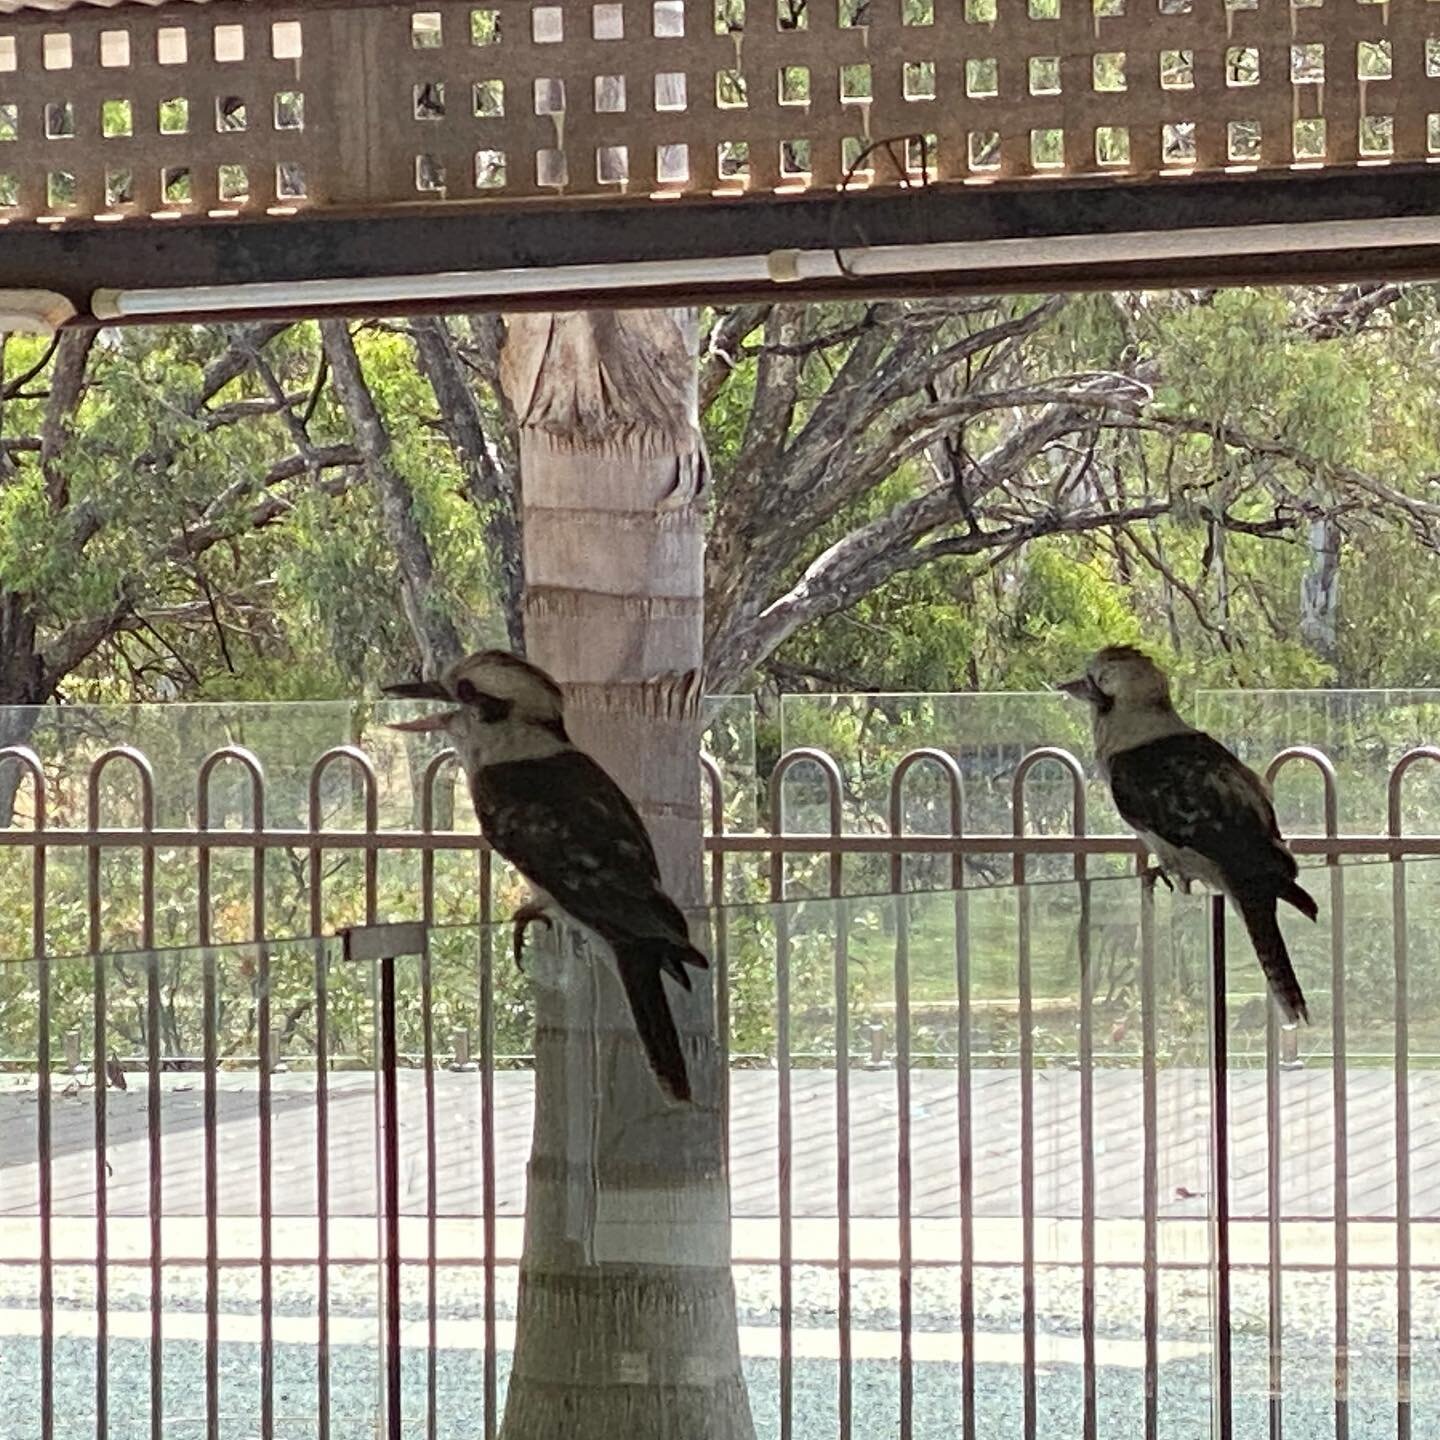 Our #kookaburras escaping from the heat during last month&rsquo;s heatwave!
#denigolfresort 
@visitdeni 
#visitdeni
@discoverdeniliquin 
#discoverdeniliquin